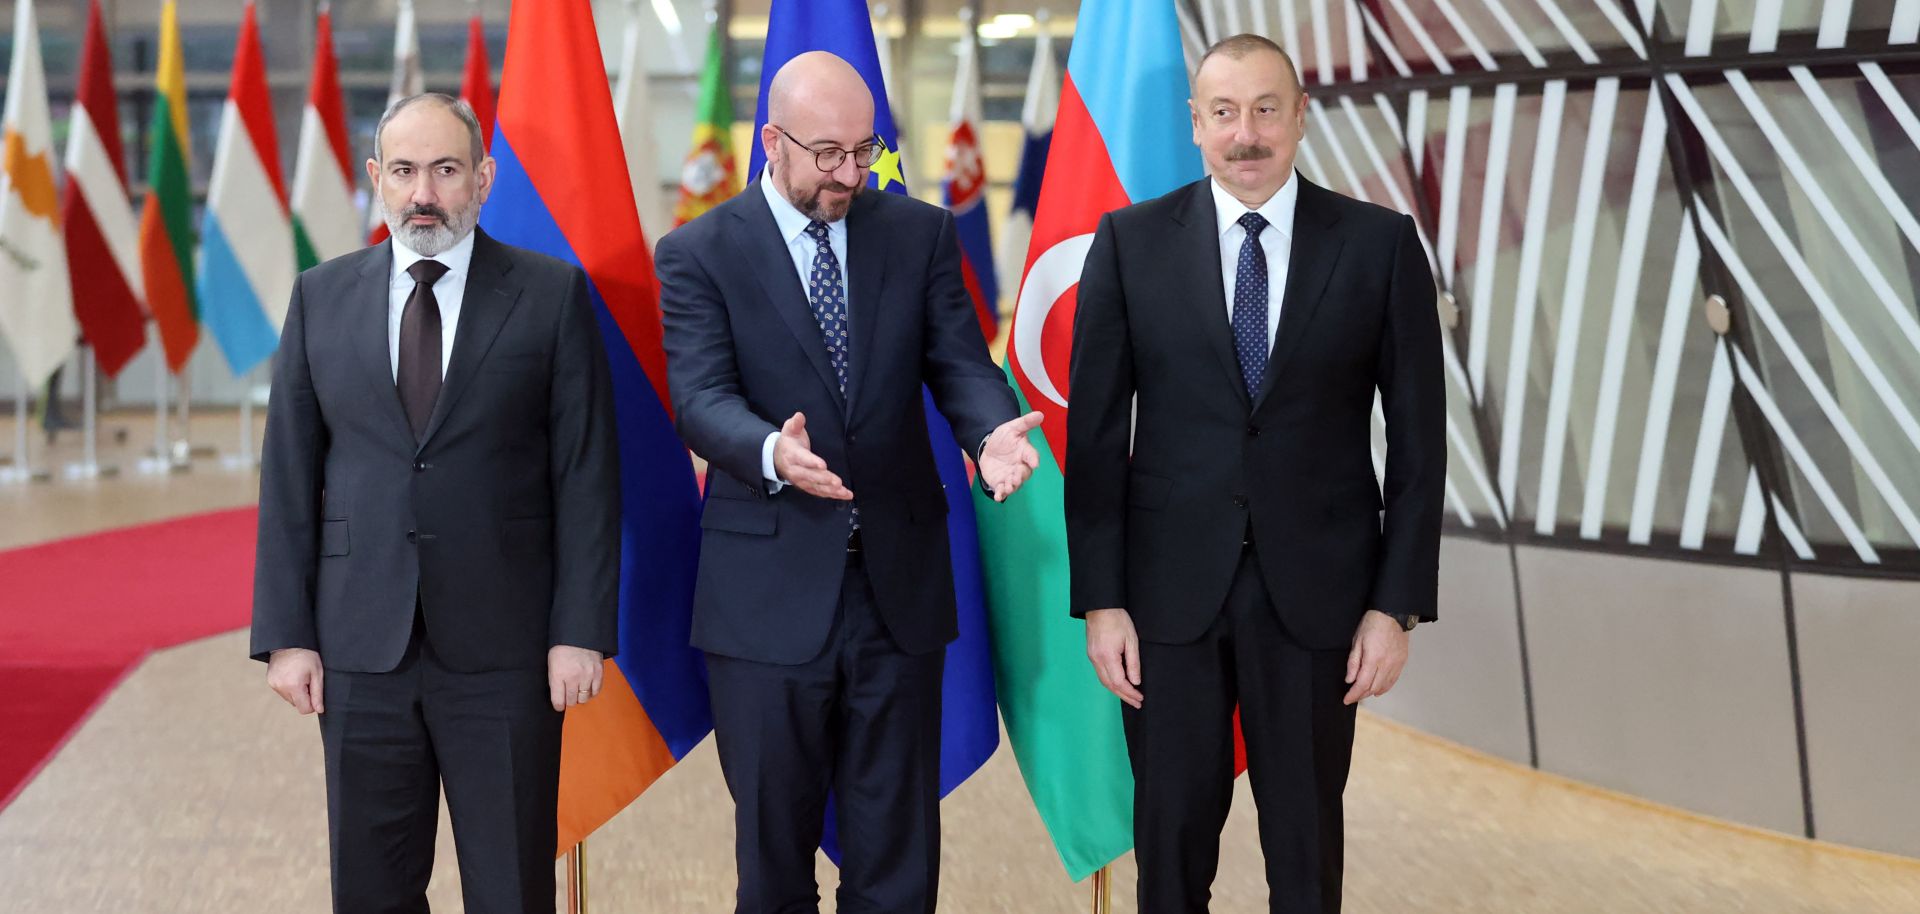 Armenian Prime Minister Nikol Pashinyan (left), European Council President Charles Michel (center) and Azerbaijani President Ilham Aliyev (right) pose for a photo in Brussels on April 6, 2022, before participating in EU-mediated talks on the Nagorno-Karabakh dispute. 